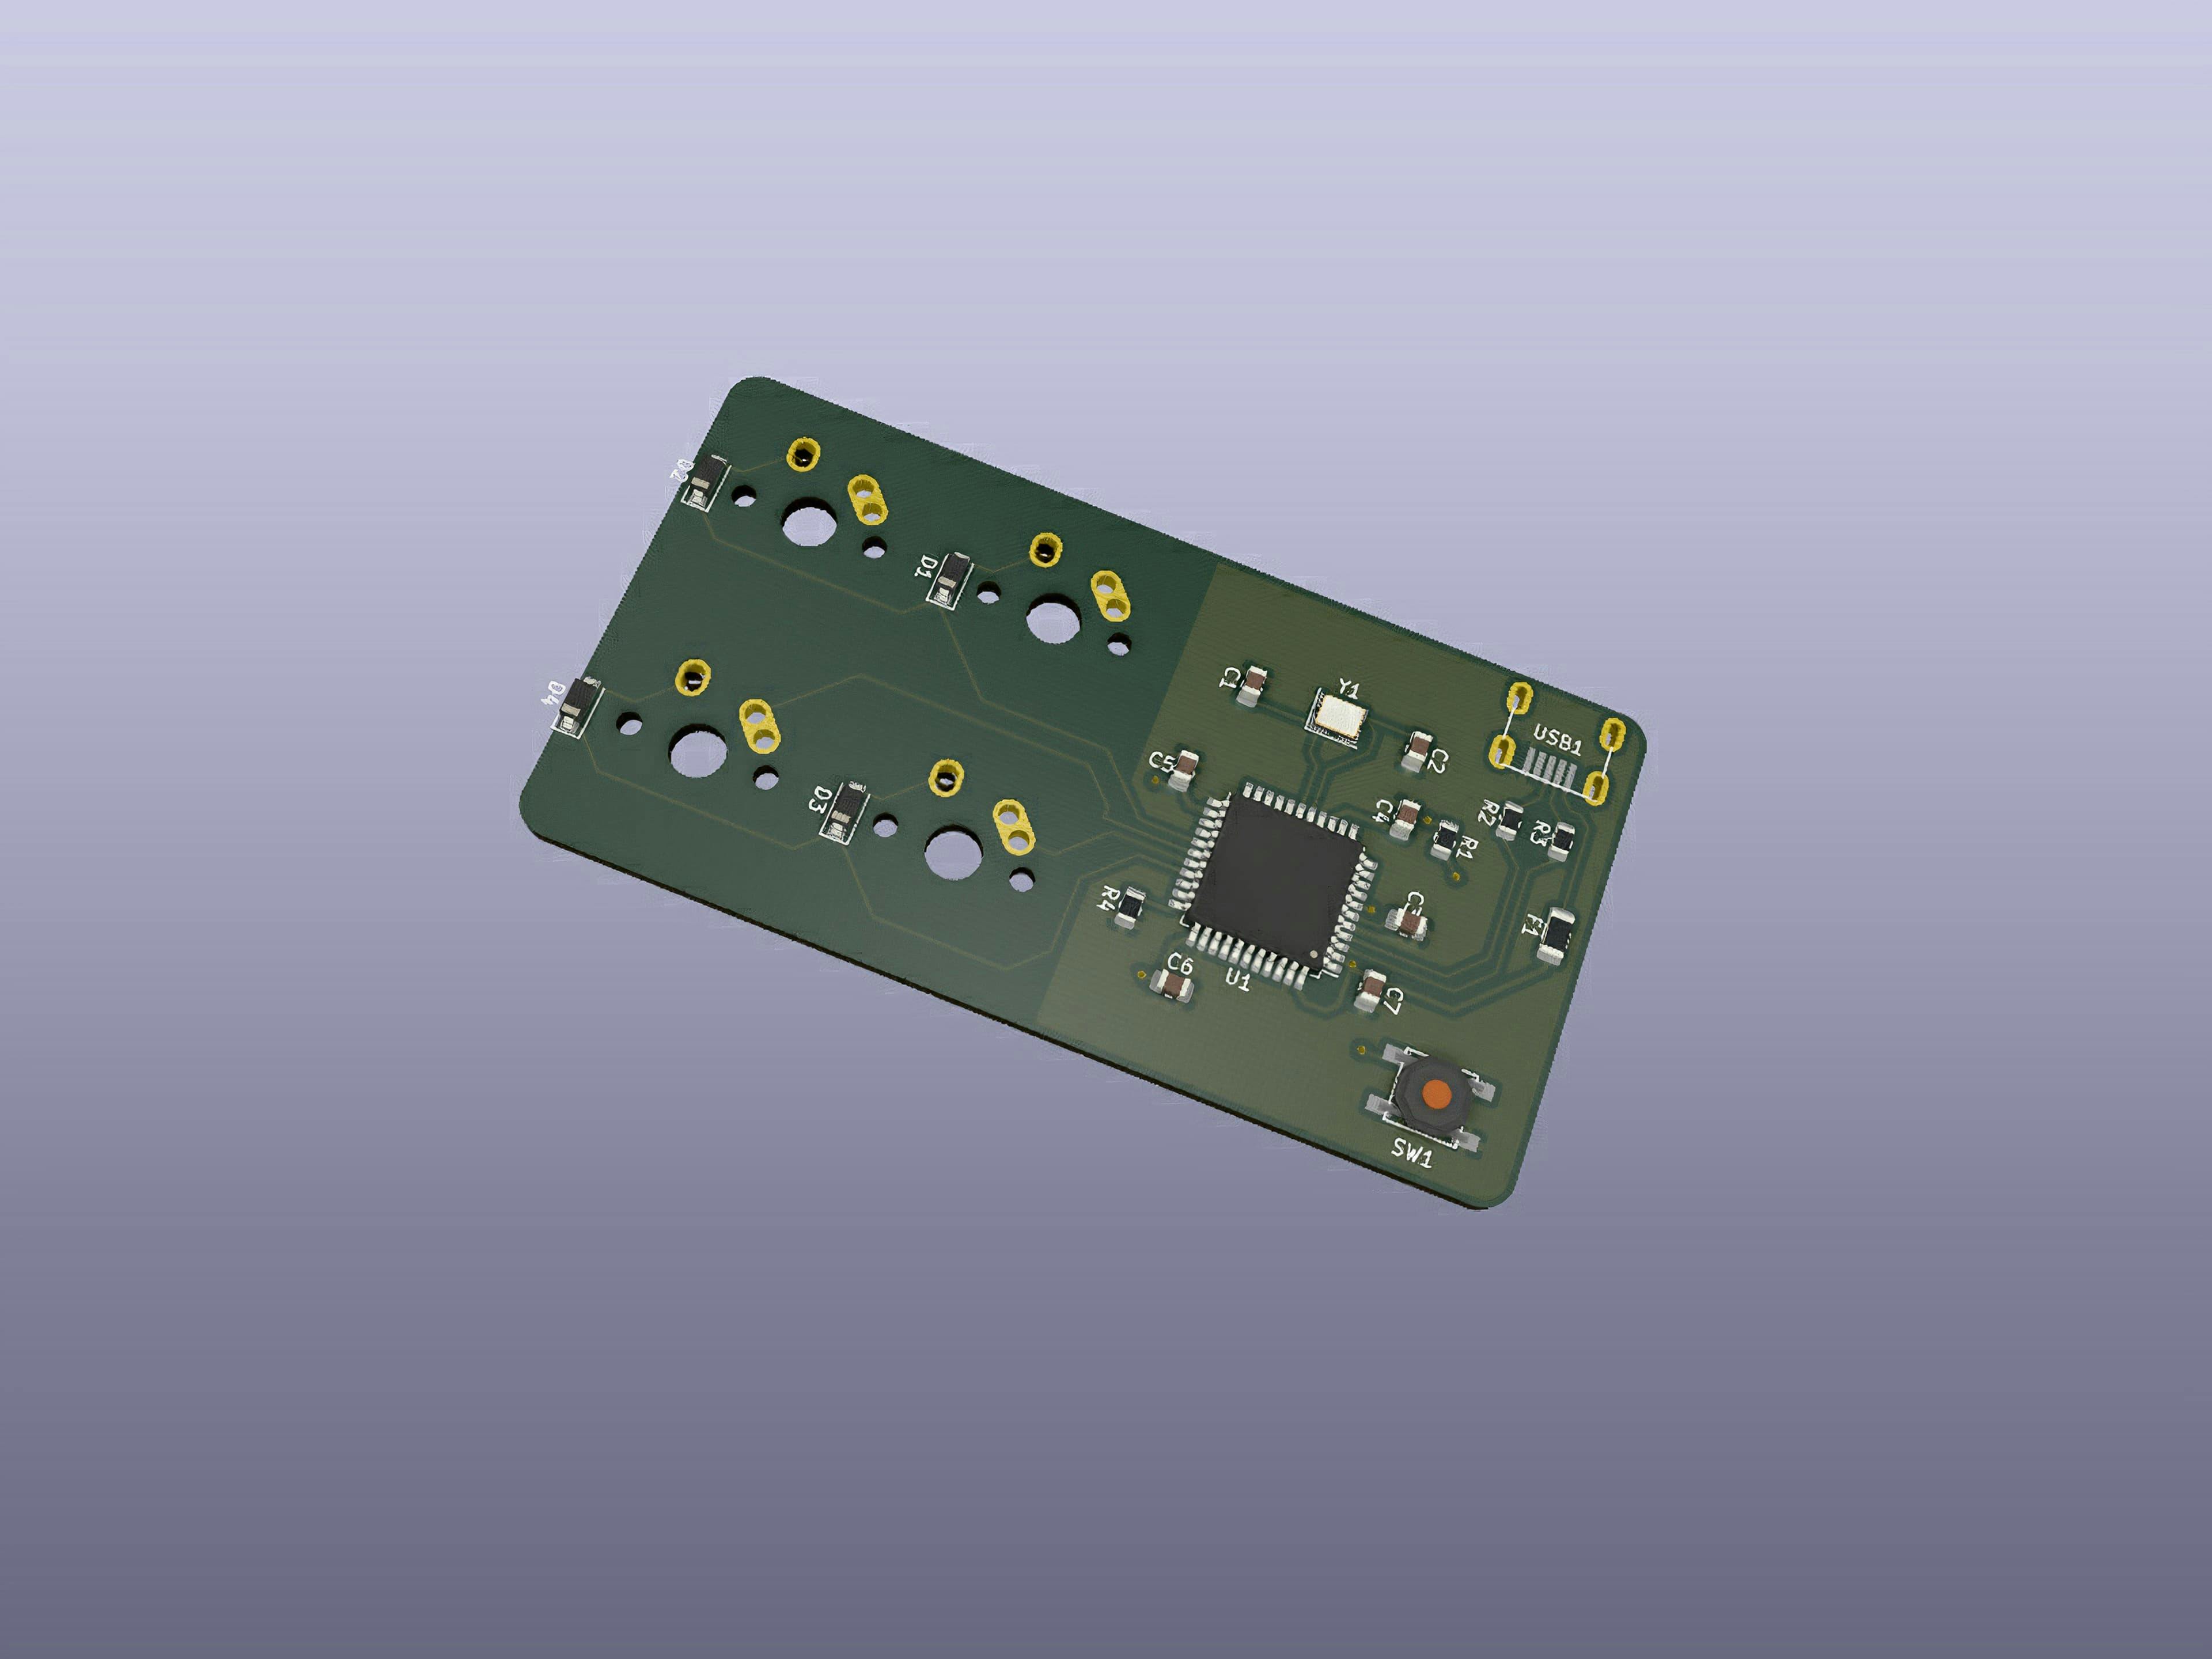 Cover image for "PCB Design"